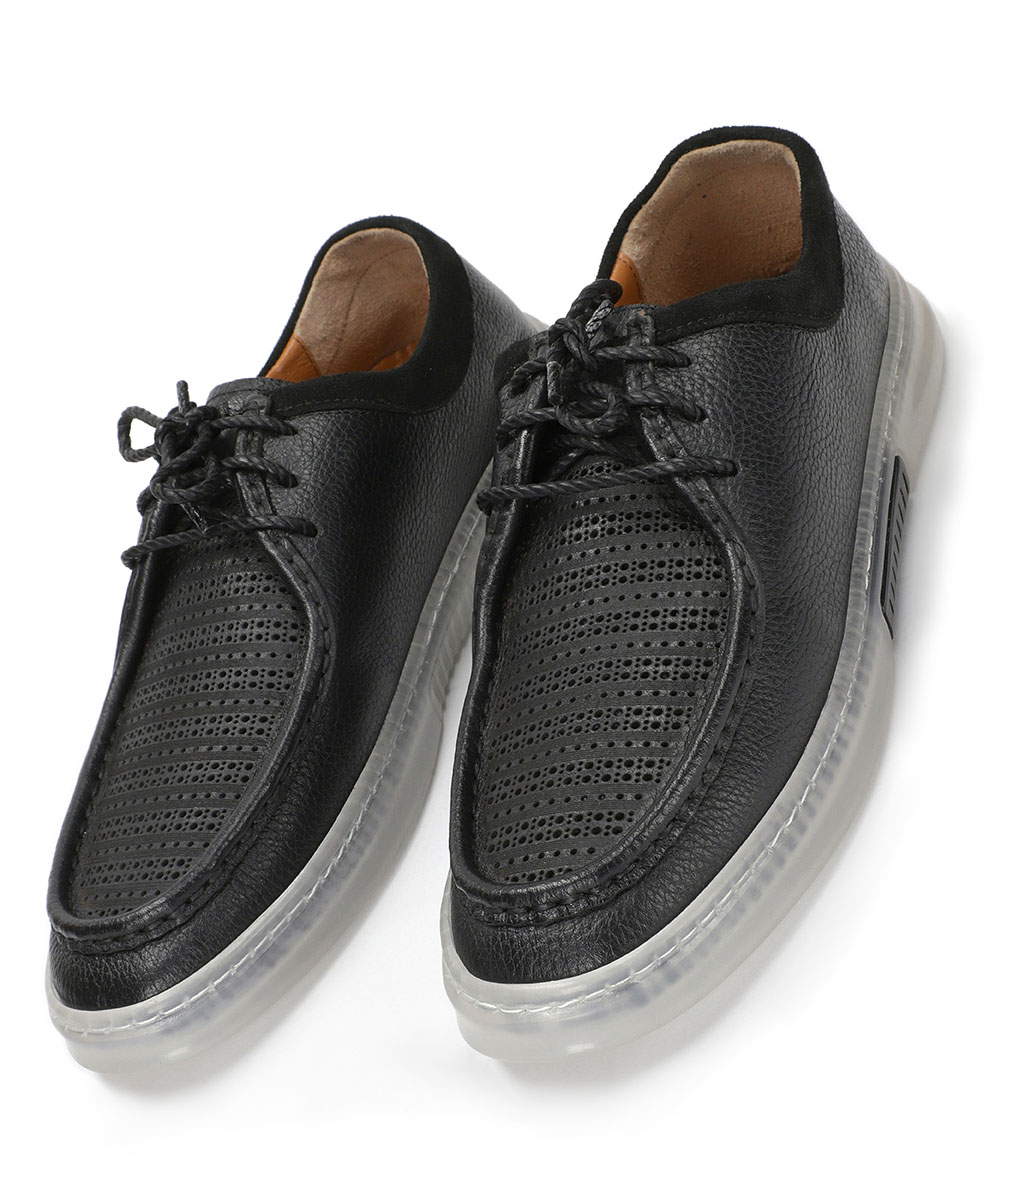 Men'sTurkish-made Dotted Black Leather Shoes